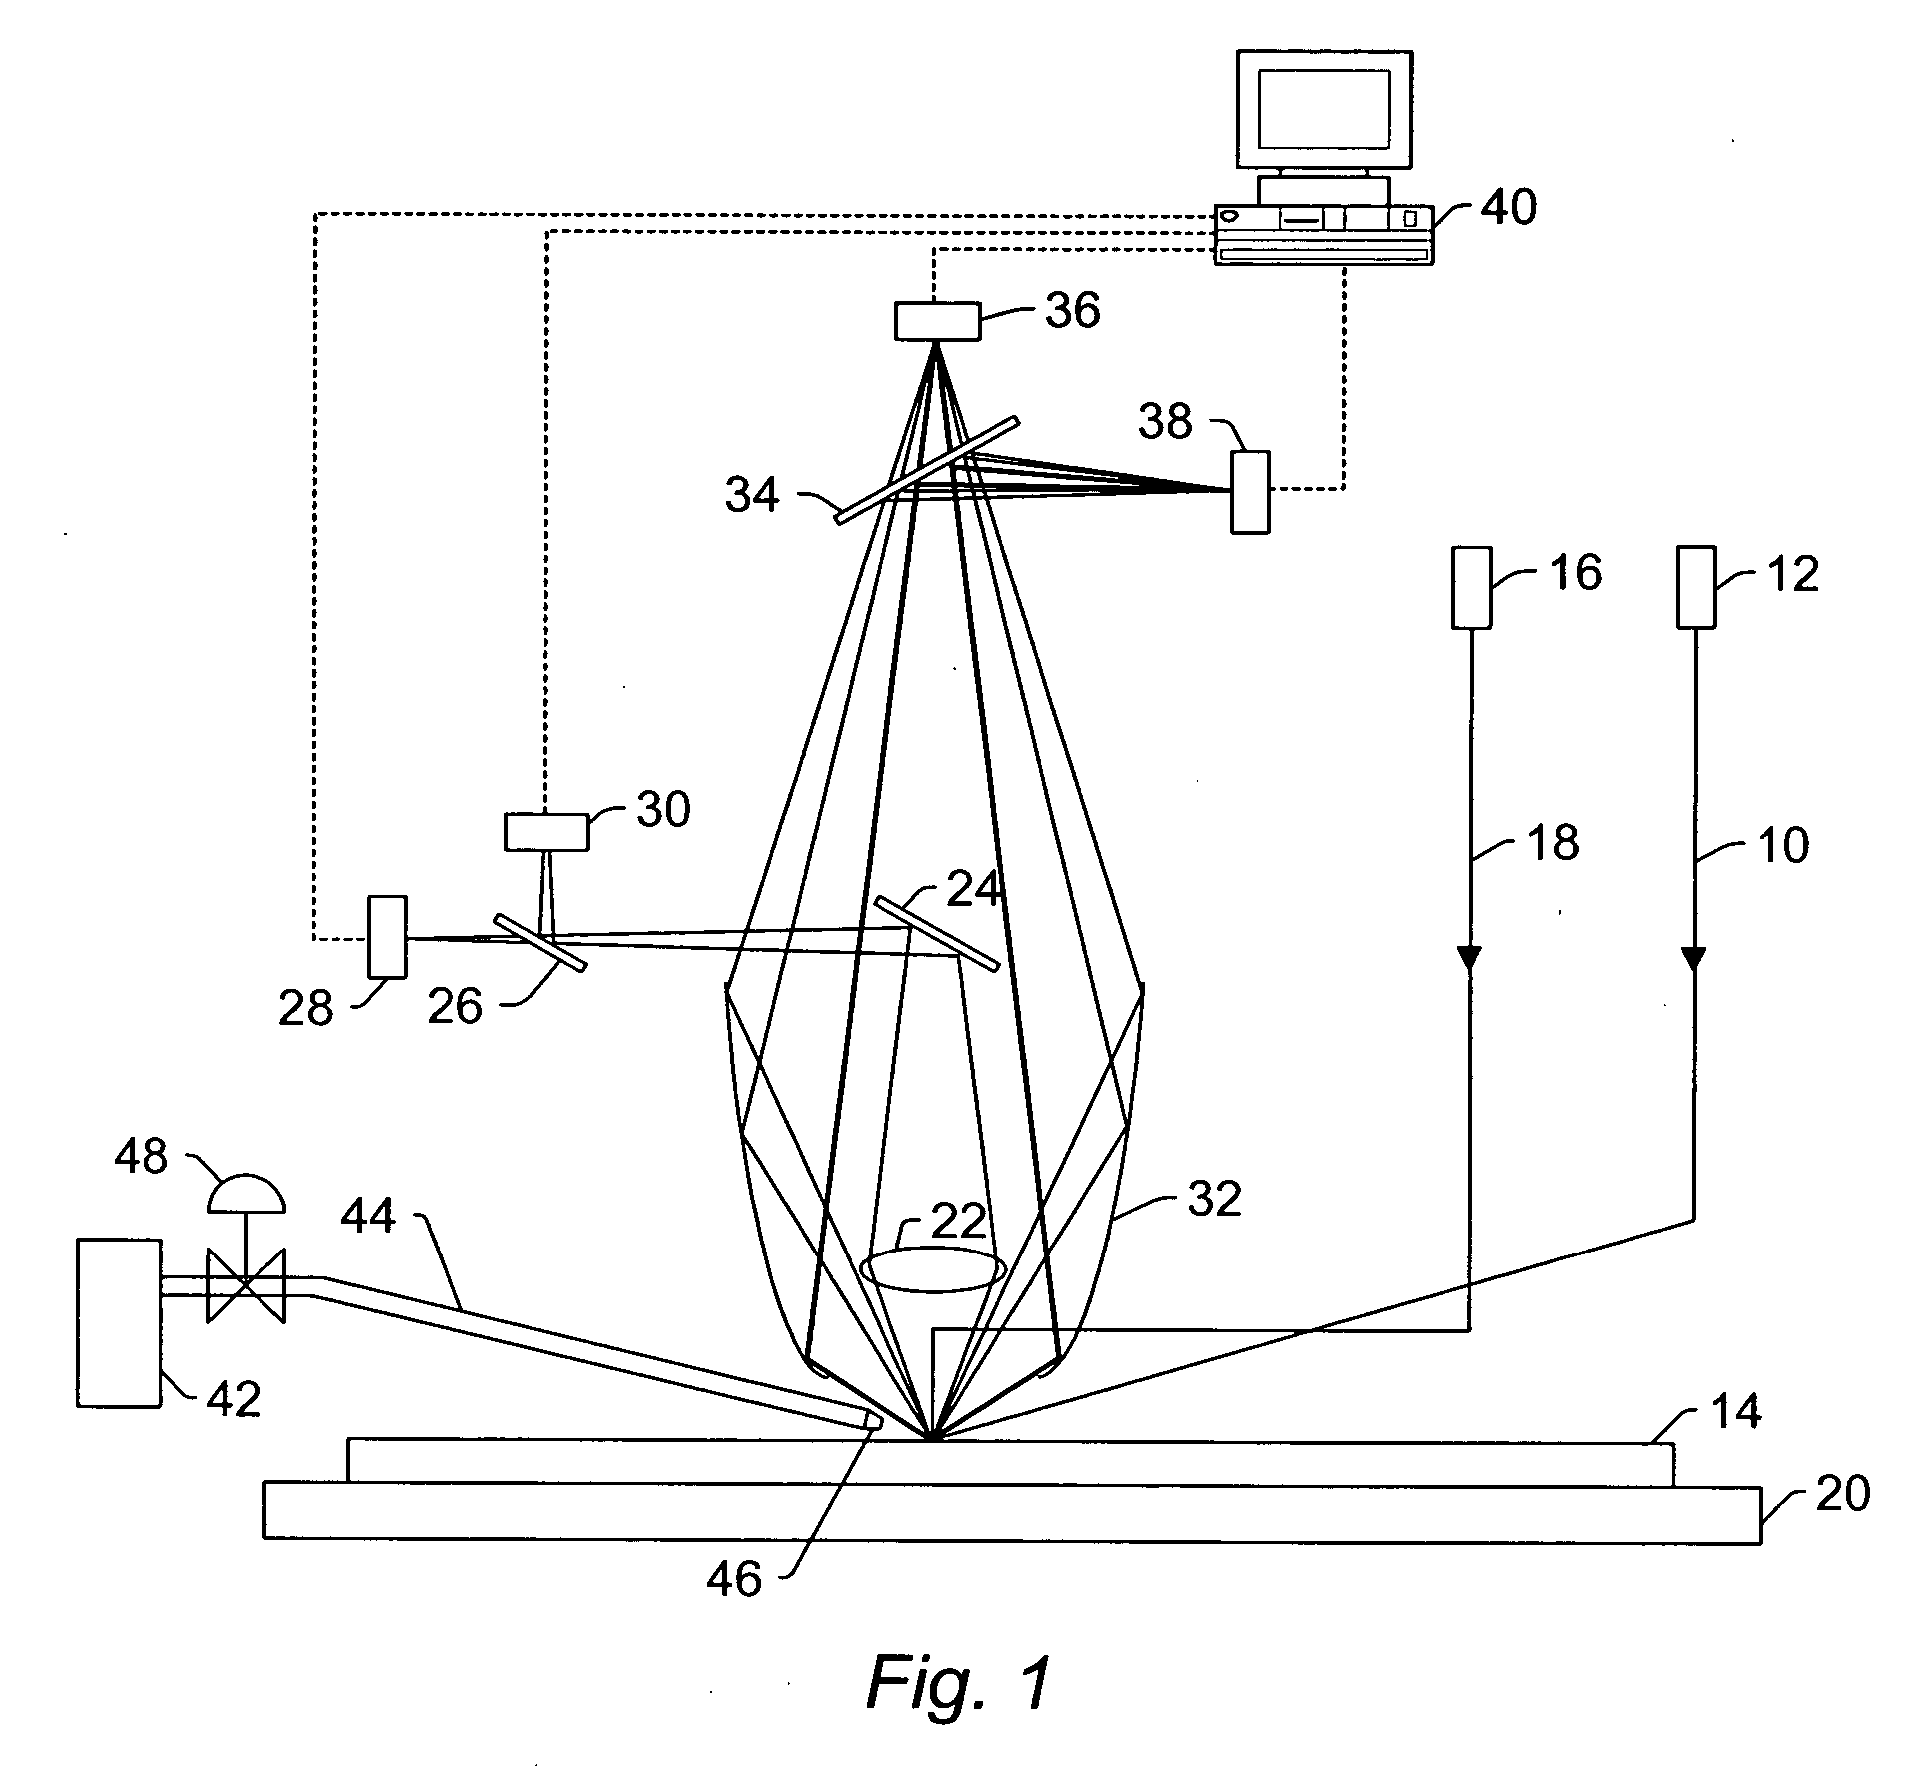 Systems and methods for inspecting a wafer with increased sensitivity